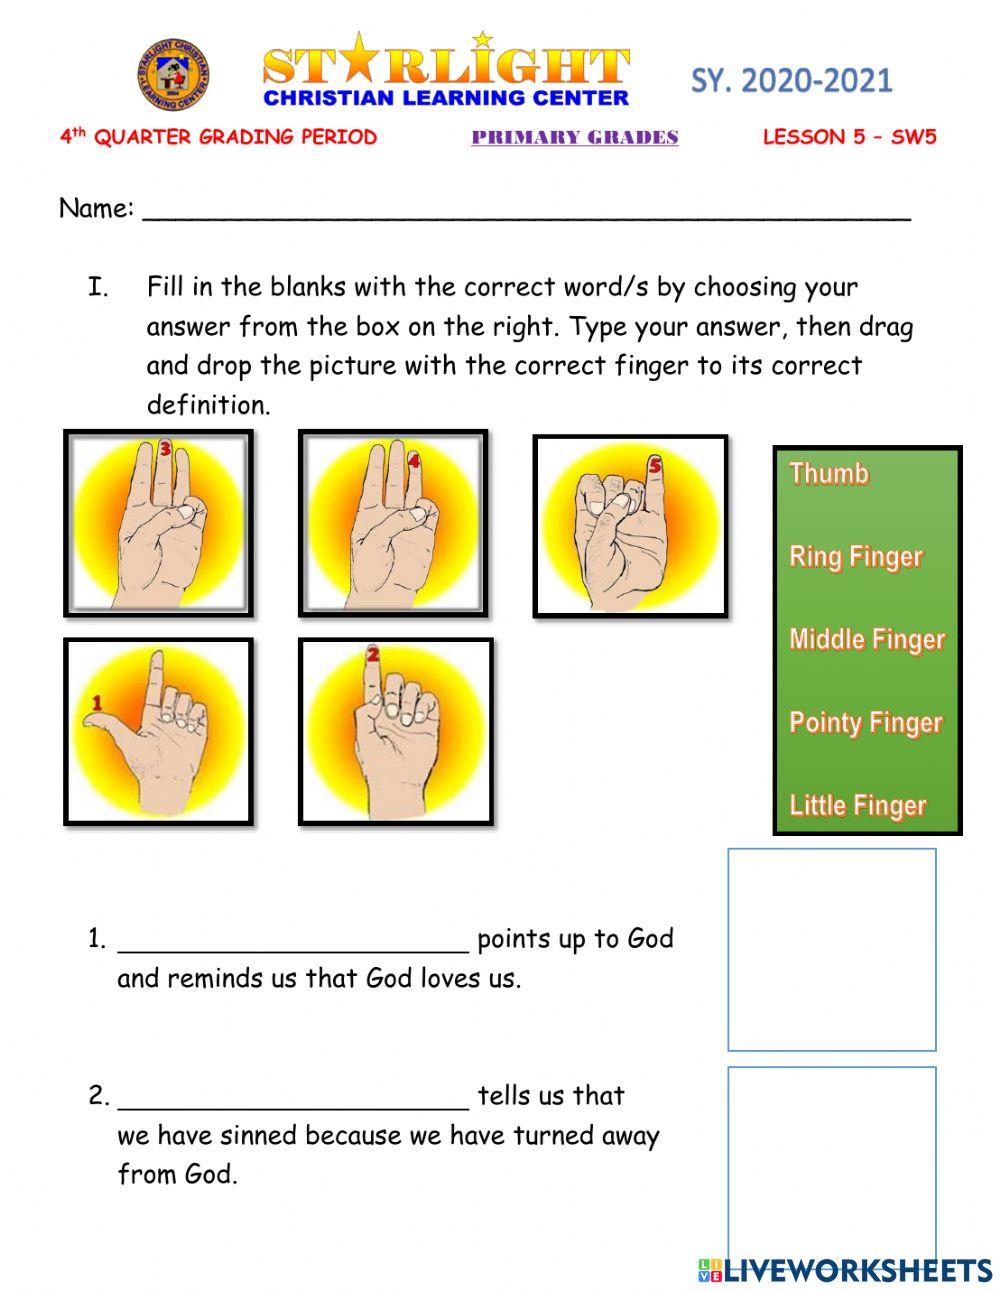 ESP-CL (PRIMARY) - SW LESSON 5: YOUR HAND WANTS TO TELL A STORY (PART2)